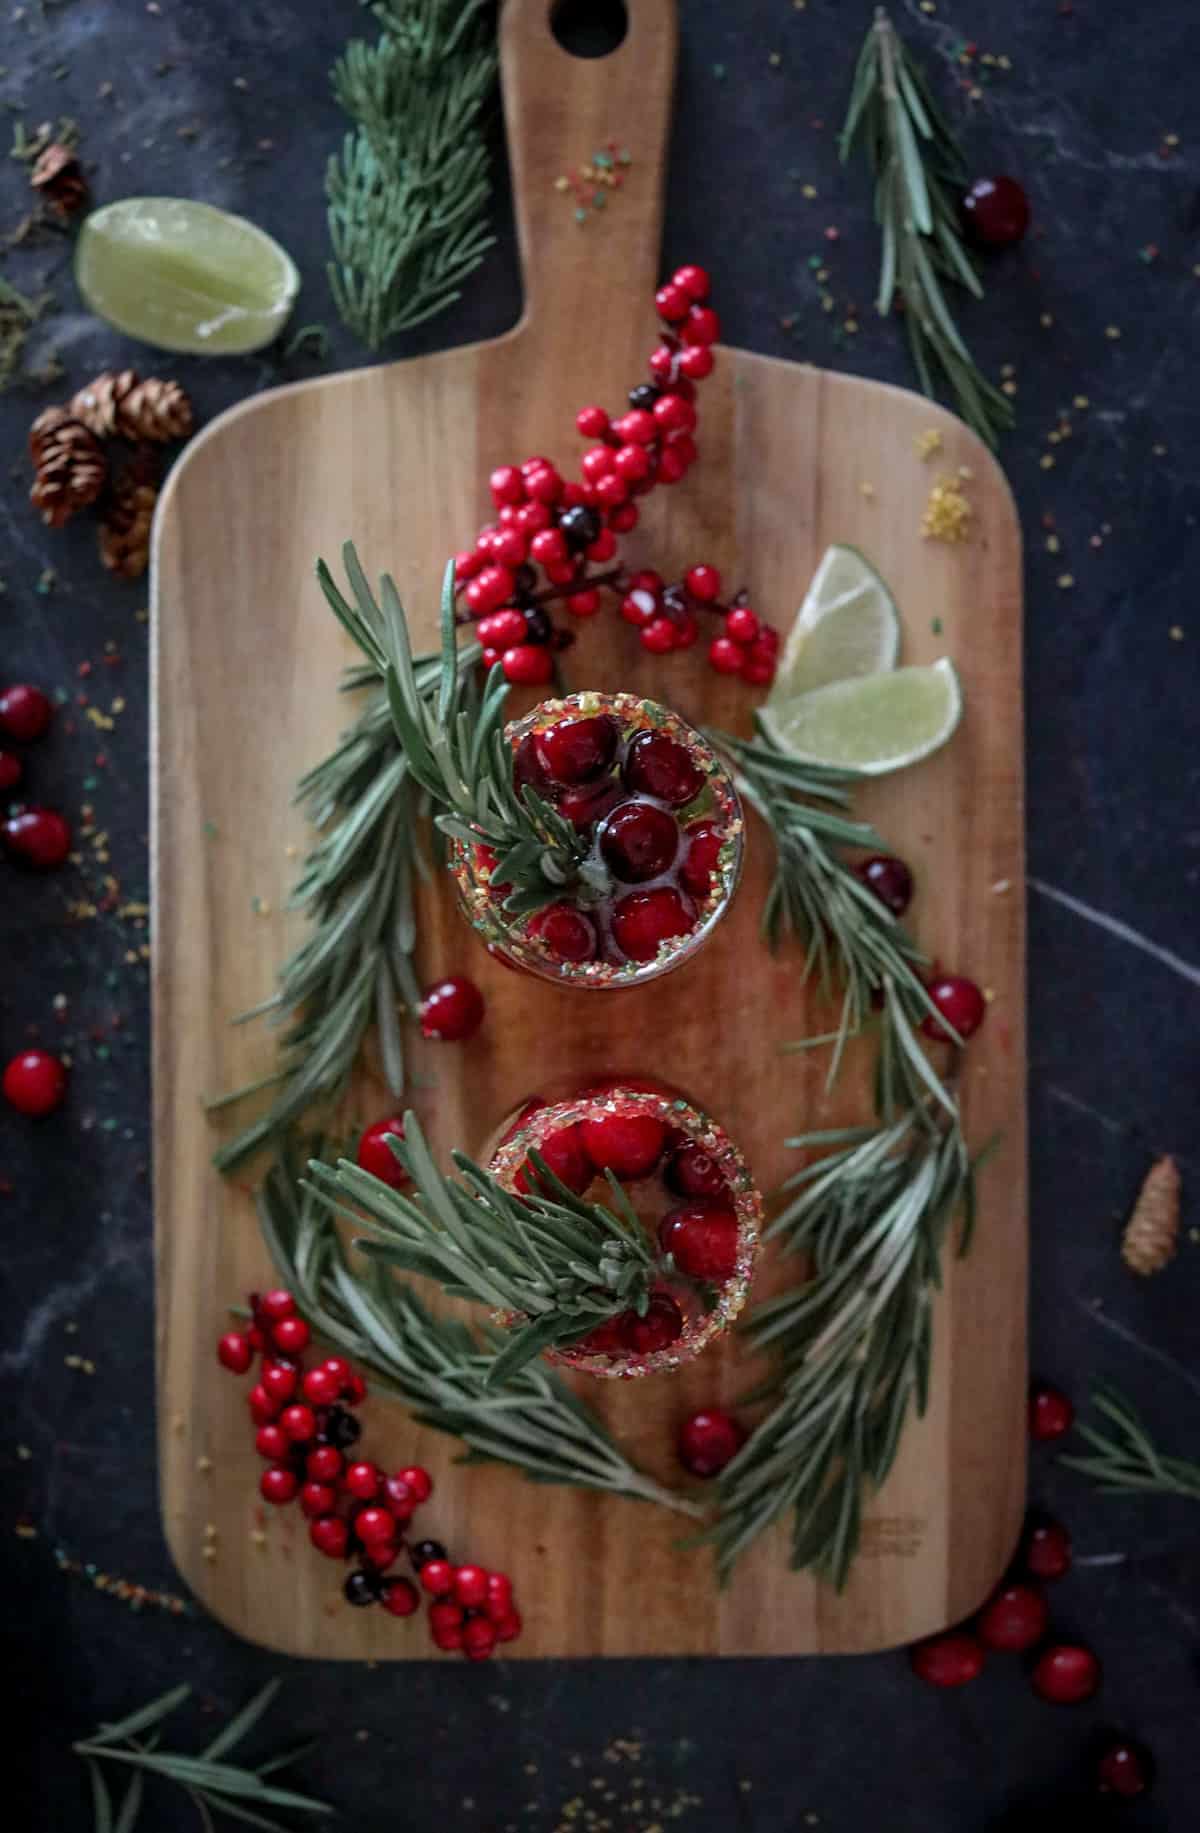 Cranberry Mimosas on a wood cutting board with rosemary, limes, and fresh cranberries.